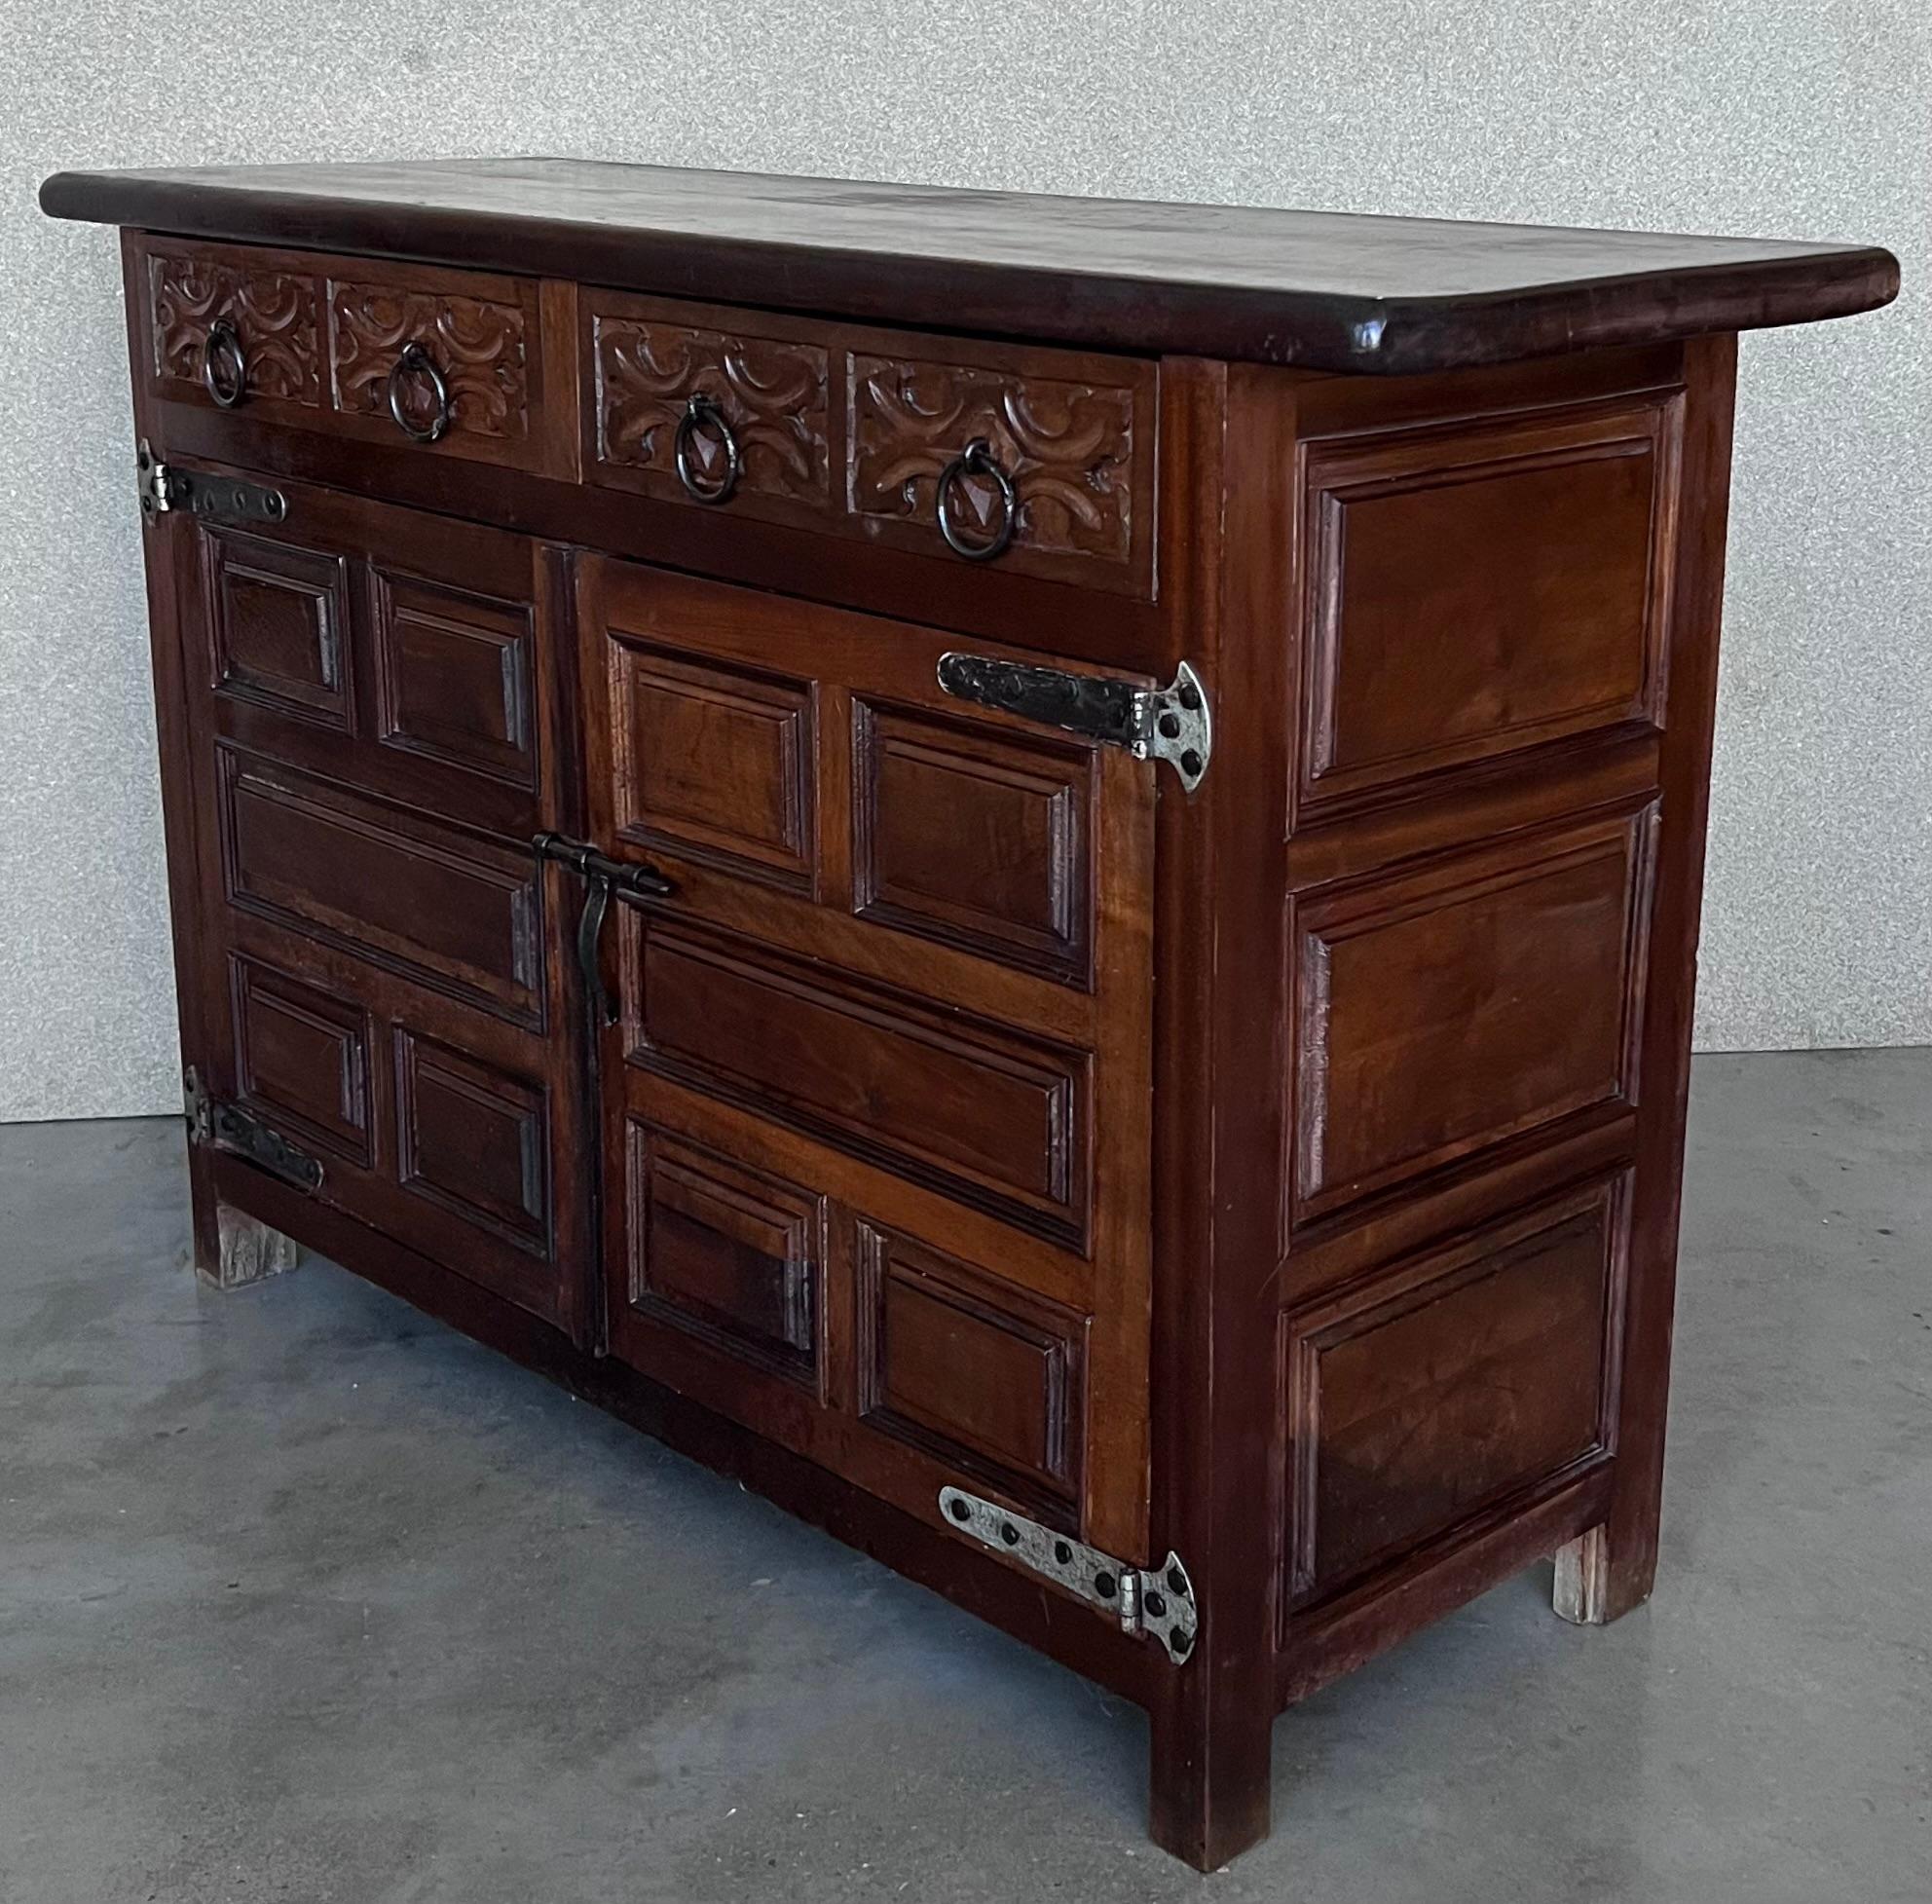 20th Century Spanish Carved Walnut Tuscan Credenza or Buffet with Two Drawers For Sale 1